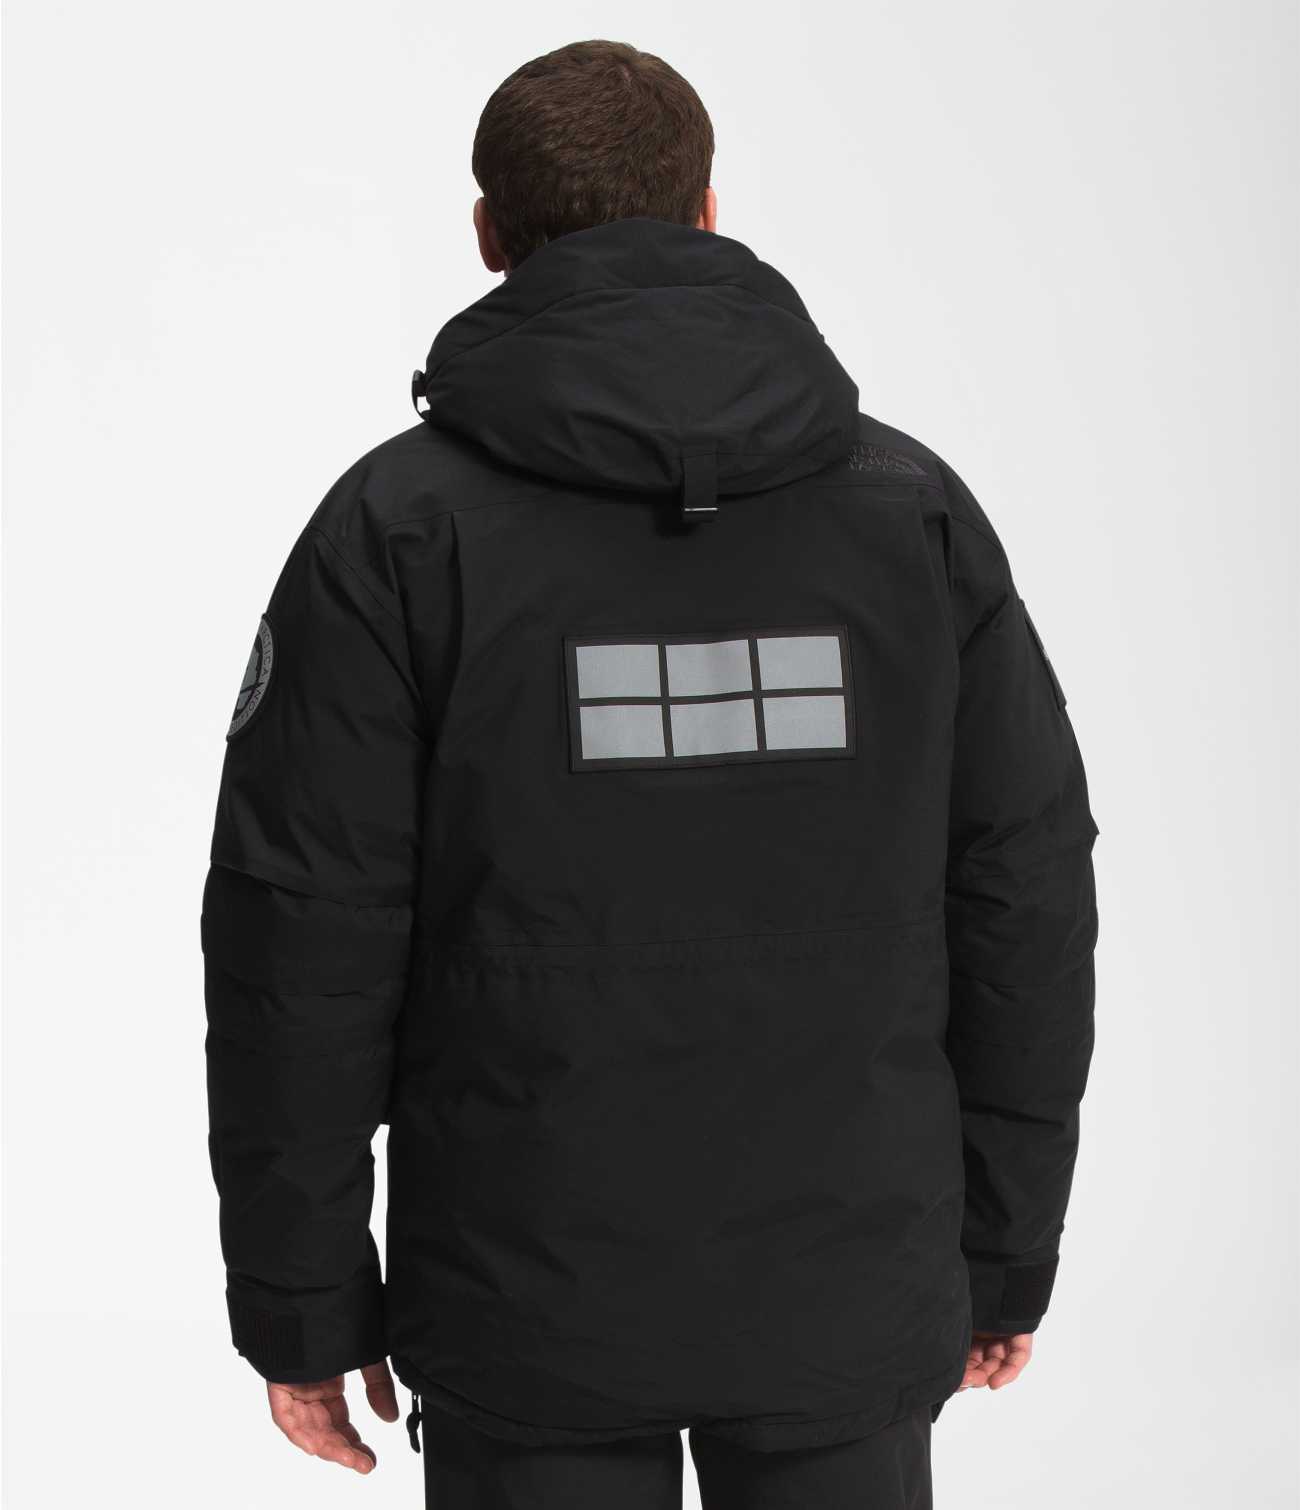 MEN'S TRANS-ANTARCTIC EXPEDITION PARKA | The North Face | The 